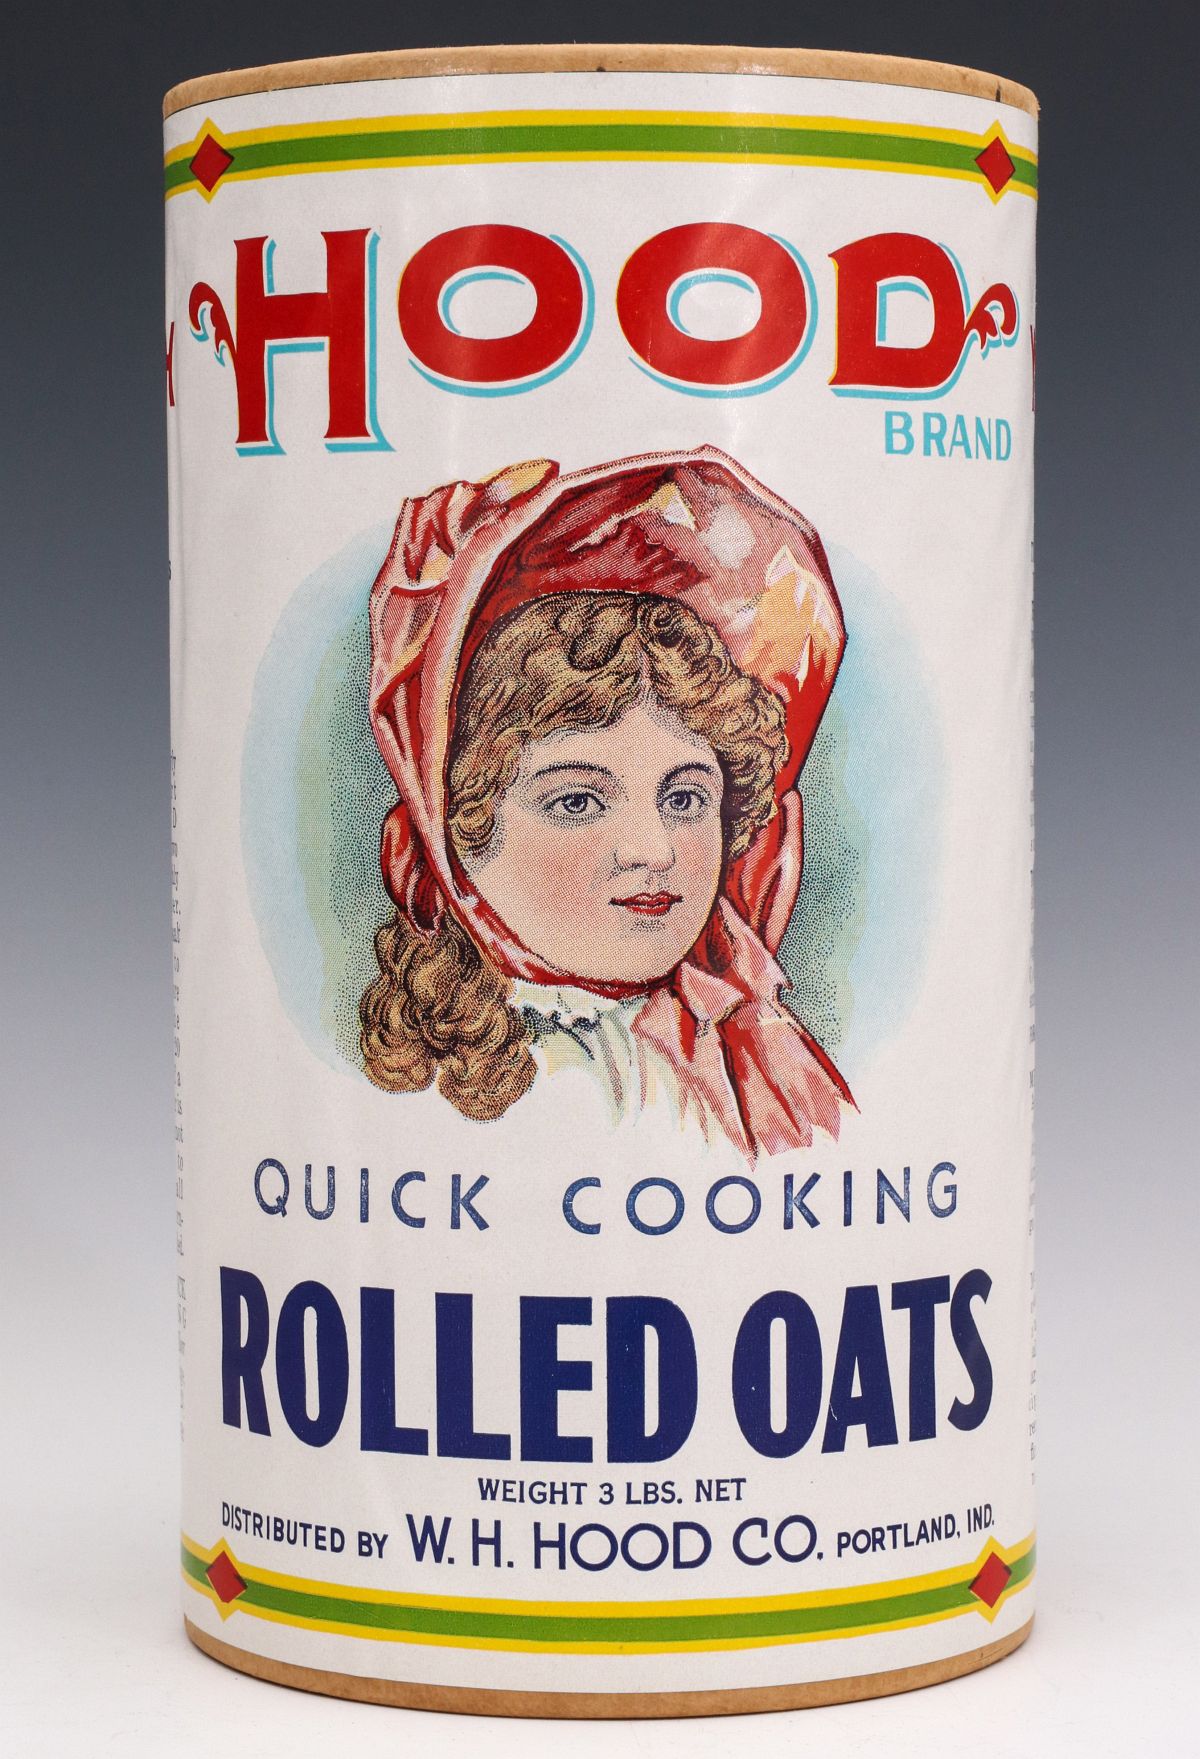 CARDBOARD OATS CONTAINER WITH COLORFUL HOOD LABEL